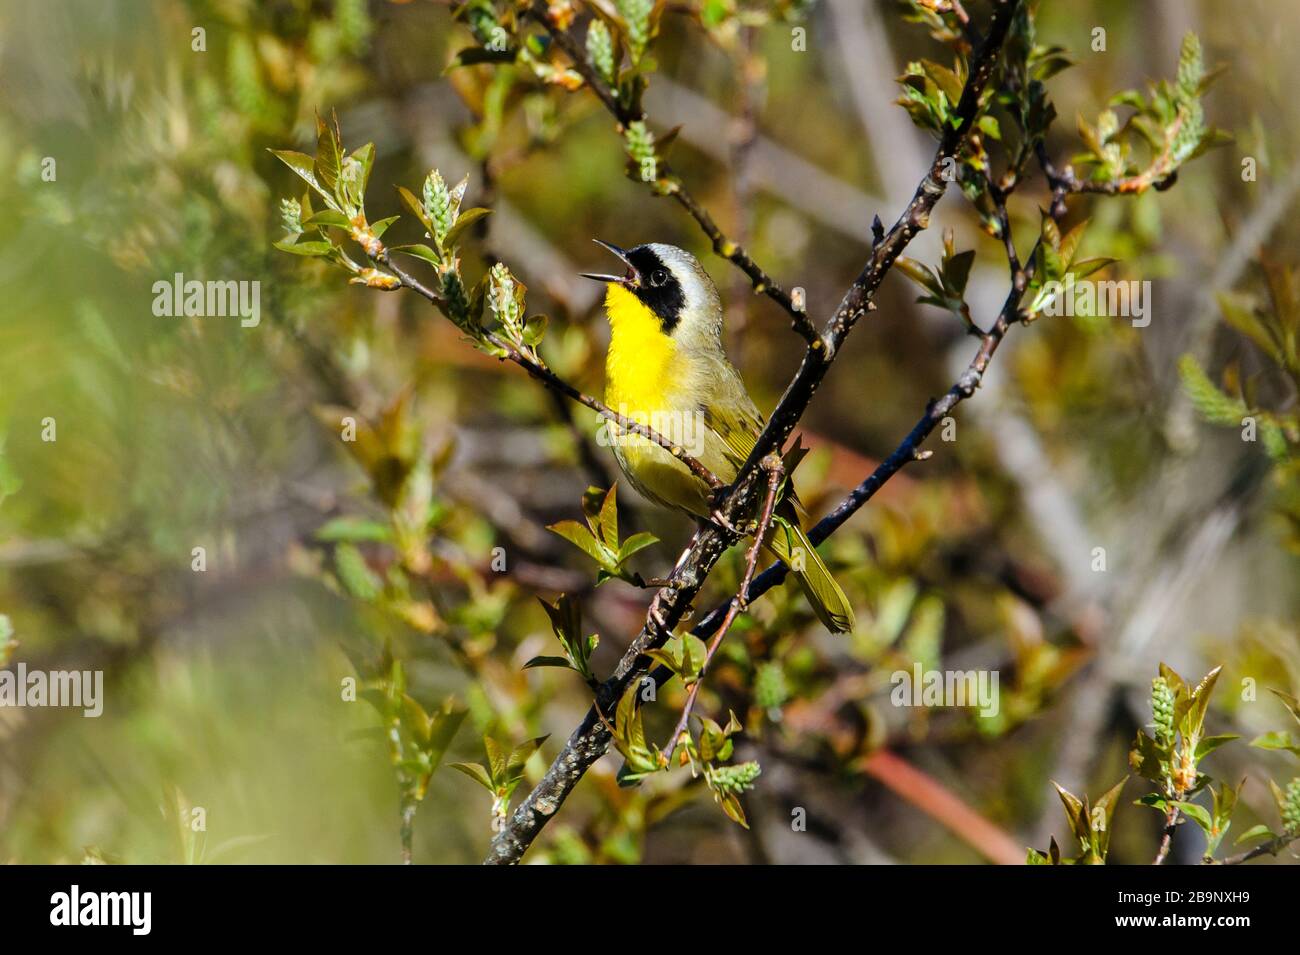 Common Yellowthroat (Geothlypis trichas) sings whileperched in a tree, Annapolis Royal Marsh, French Basin trail, Annapolis Royal, Nova Scotia, Canada Stock Photo